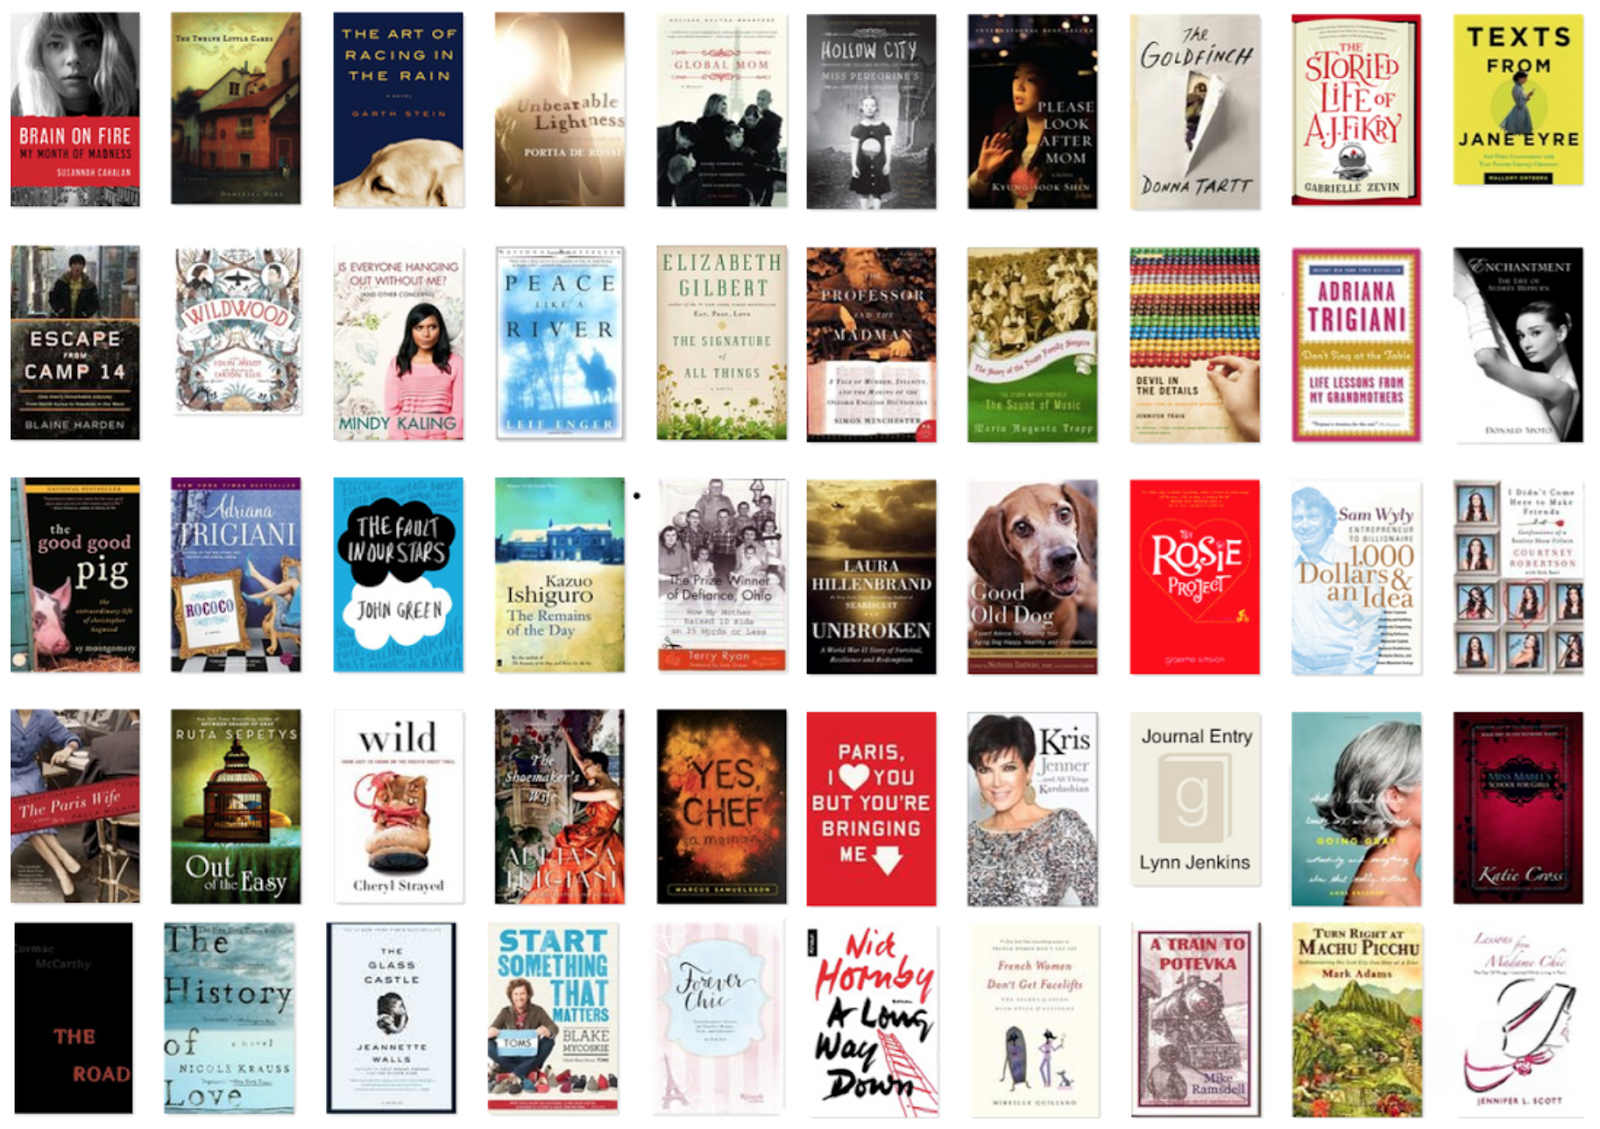 xoxo: What I Learned From Reading 50 Books in One Year